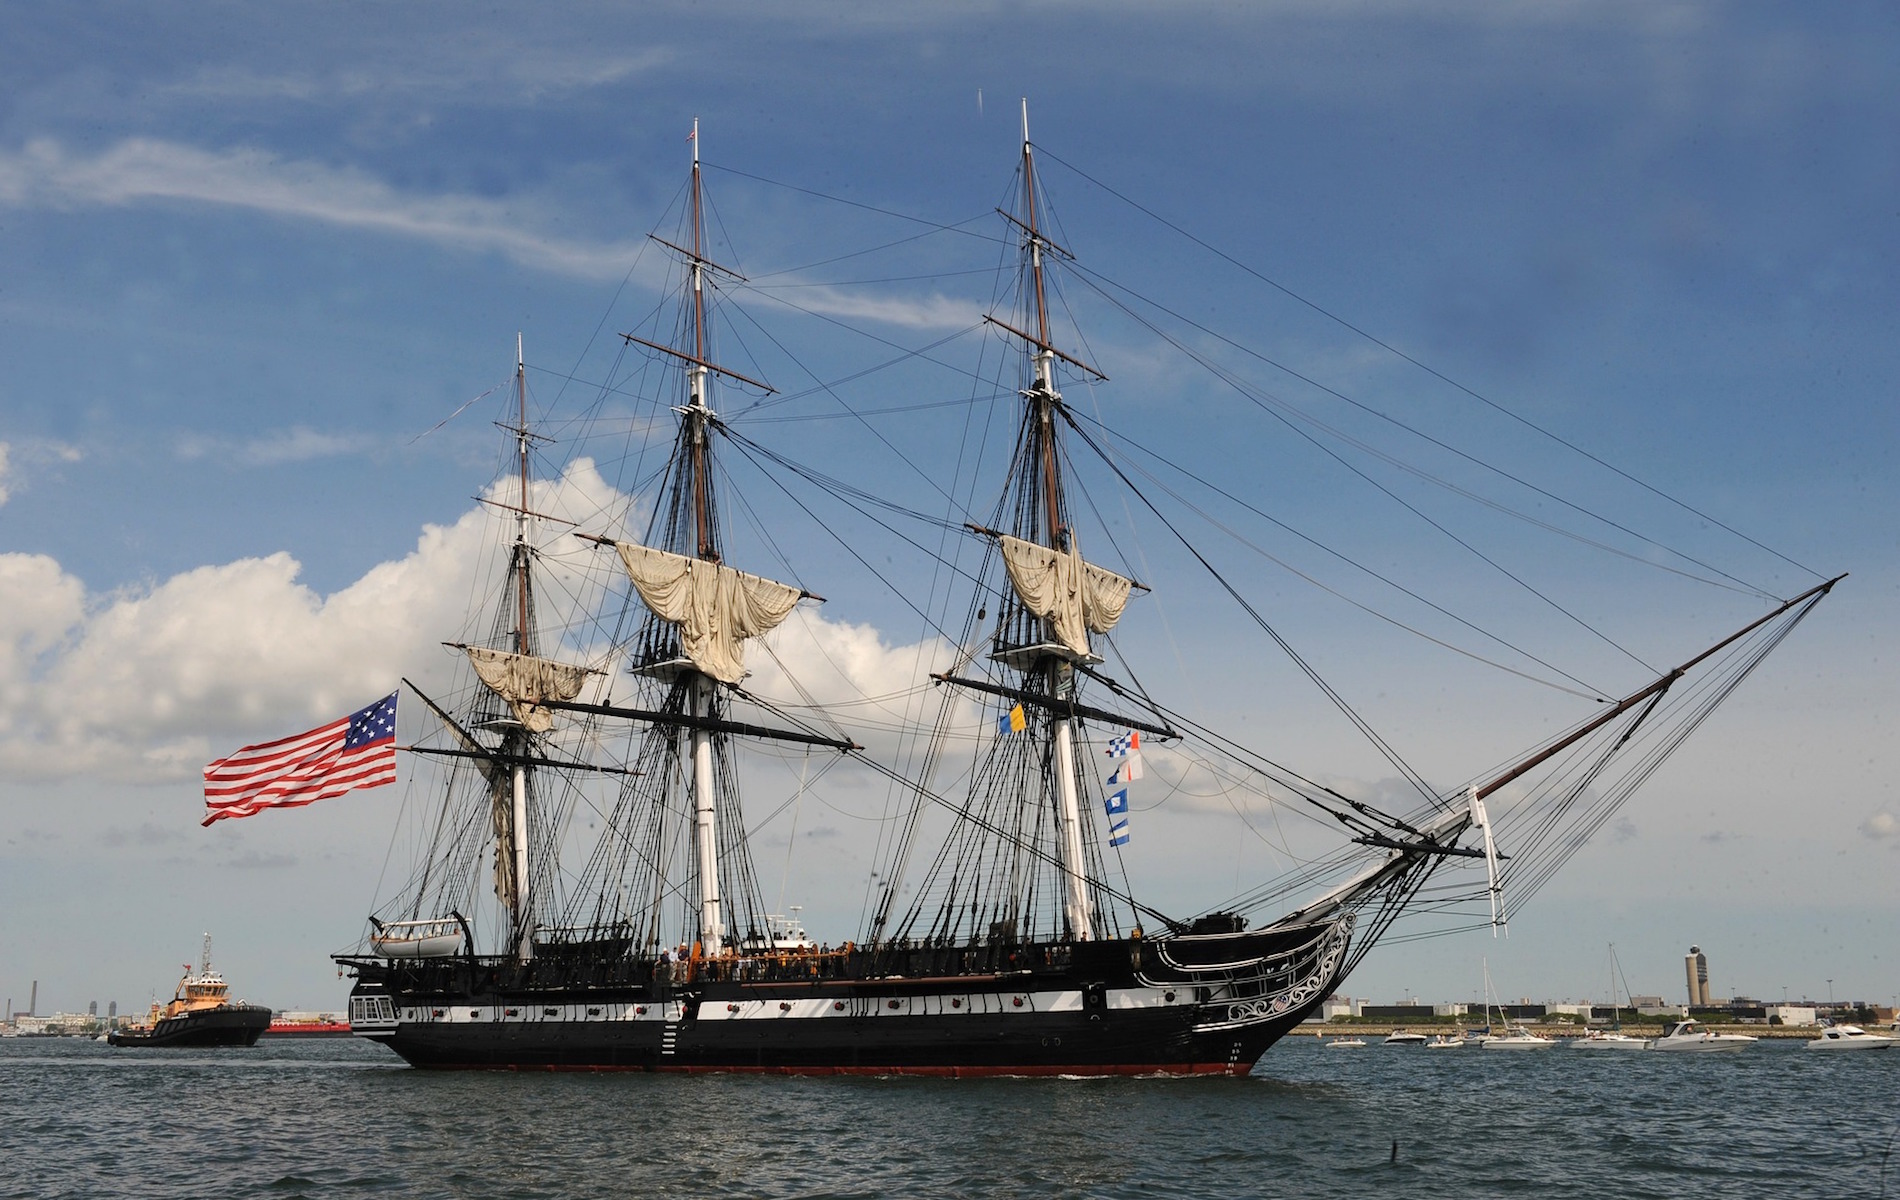 historic 3 mast ship on water with 3 sails and one american flag to the left